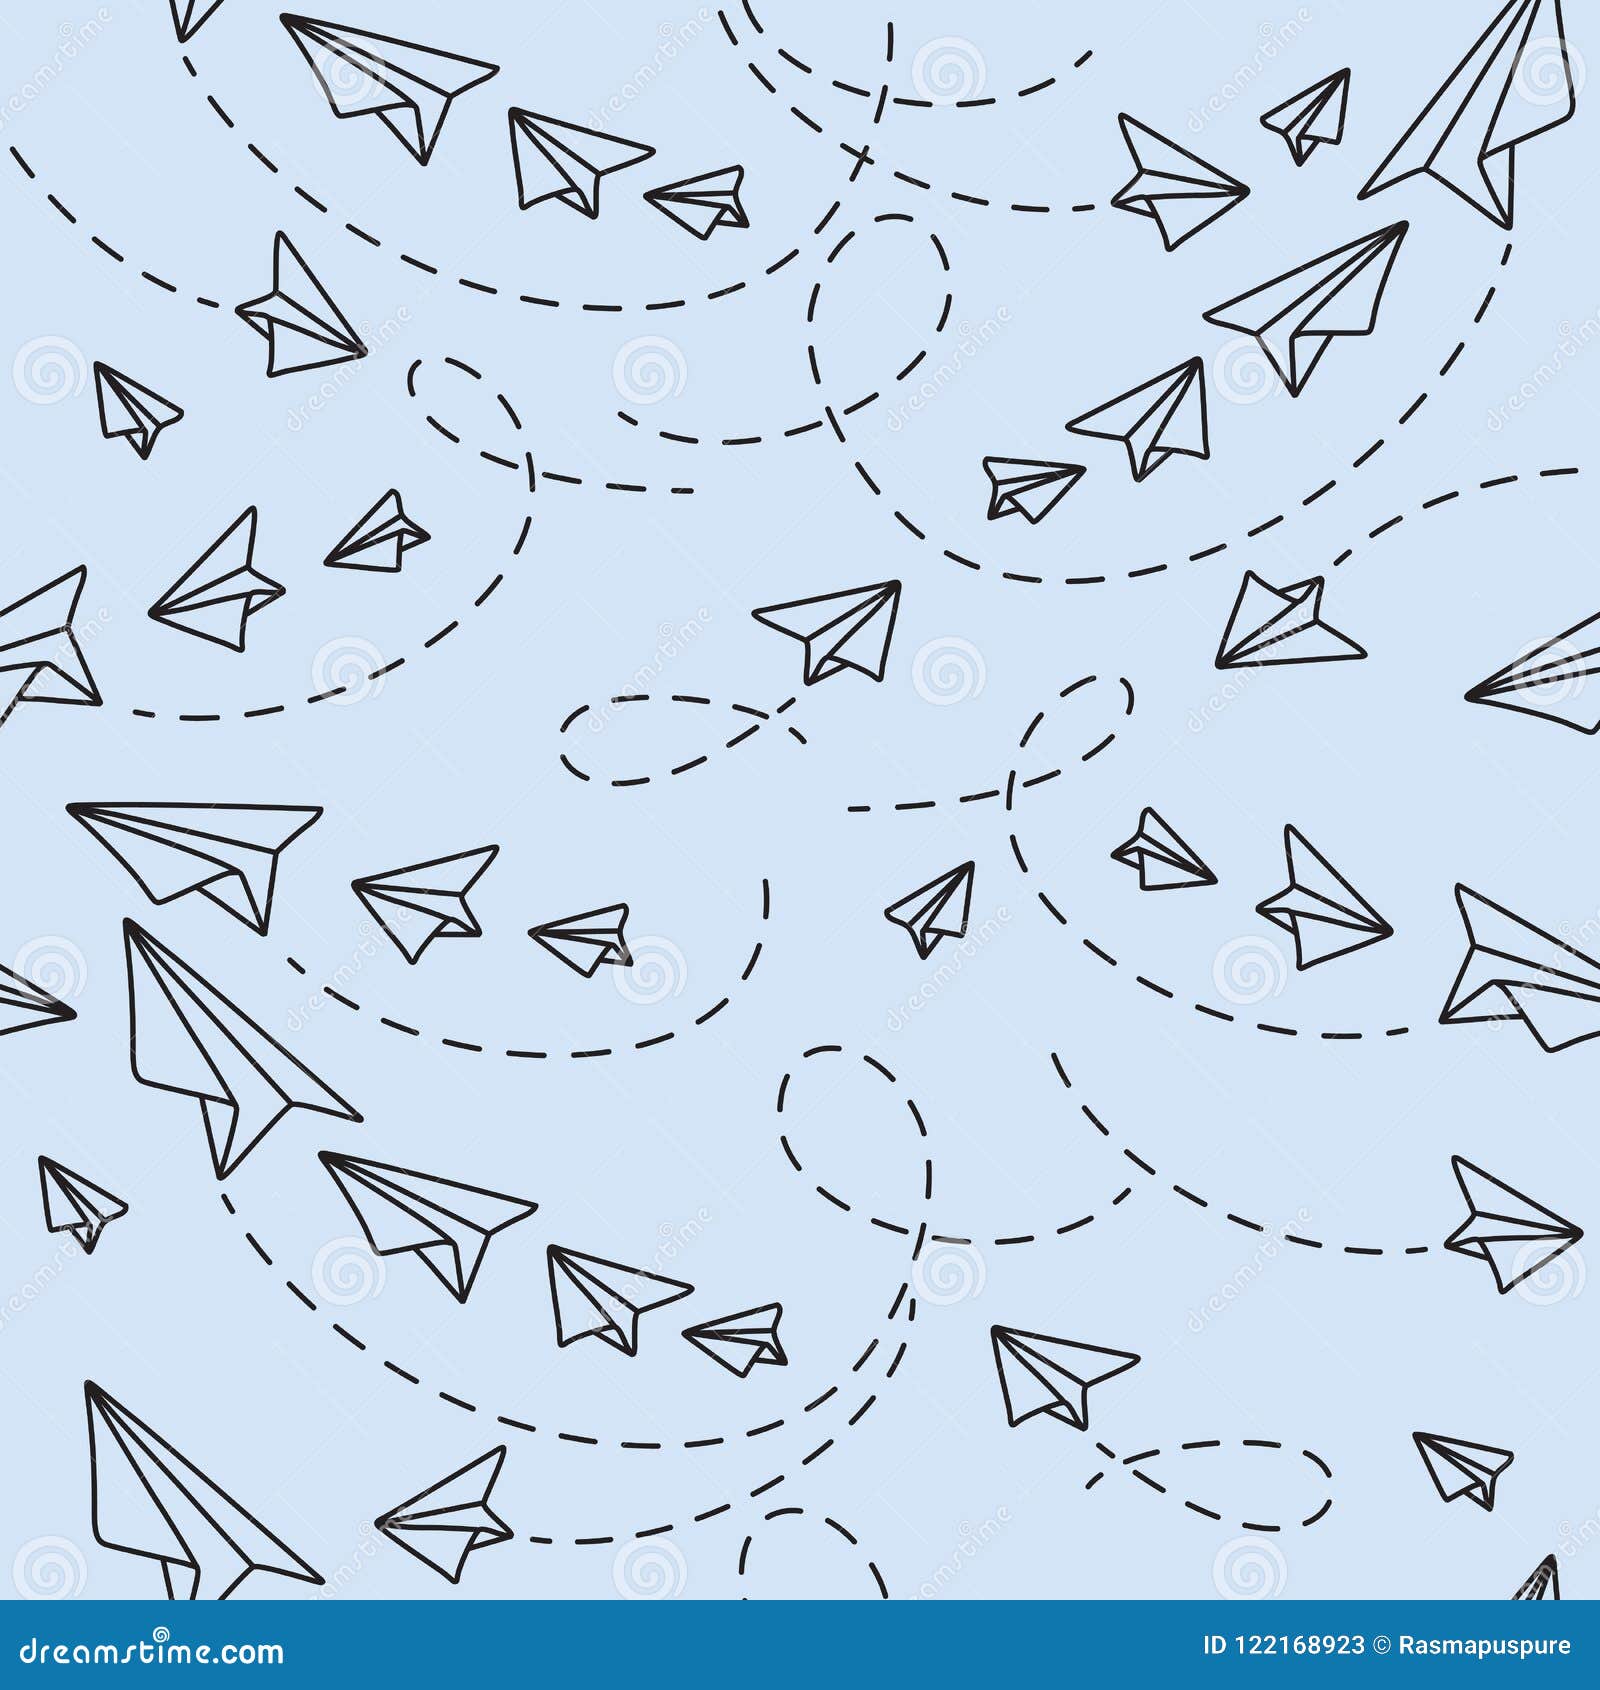 flying paper planes on light blue background. seamless pattern